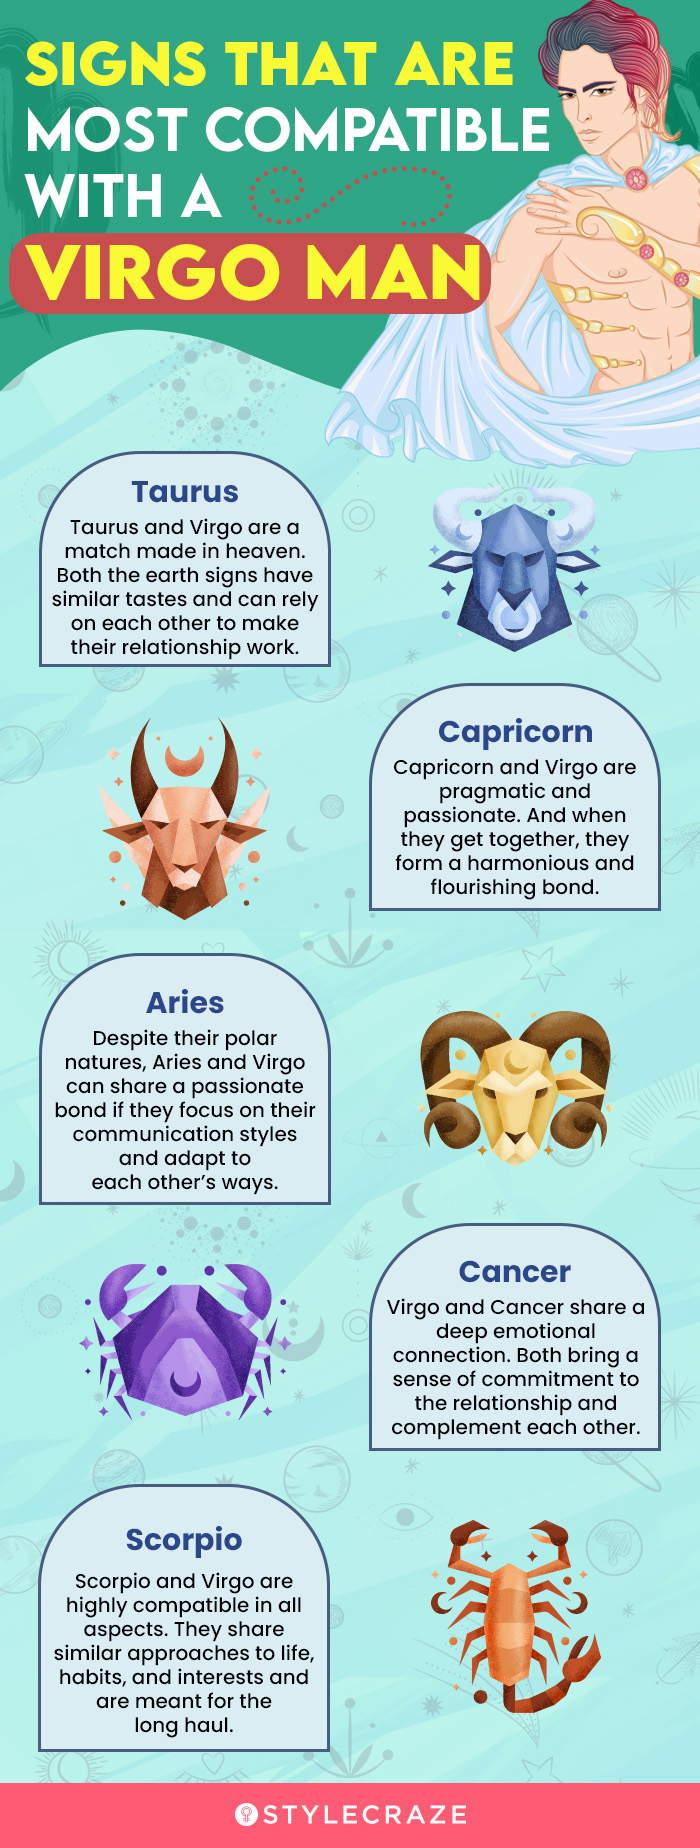 signs that are most compatible with a virgo man (infographic)